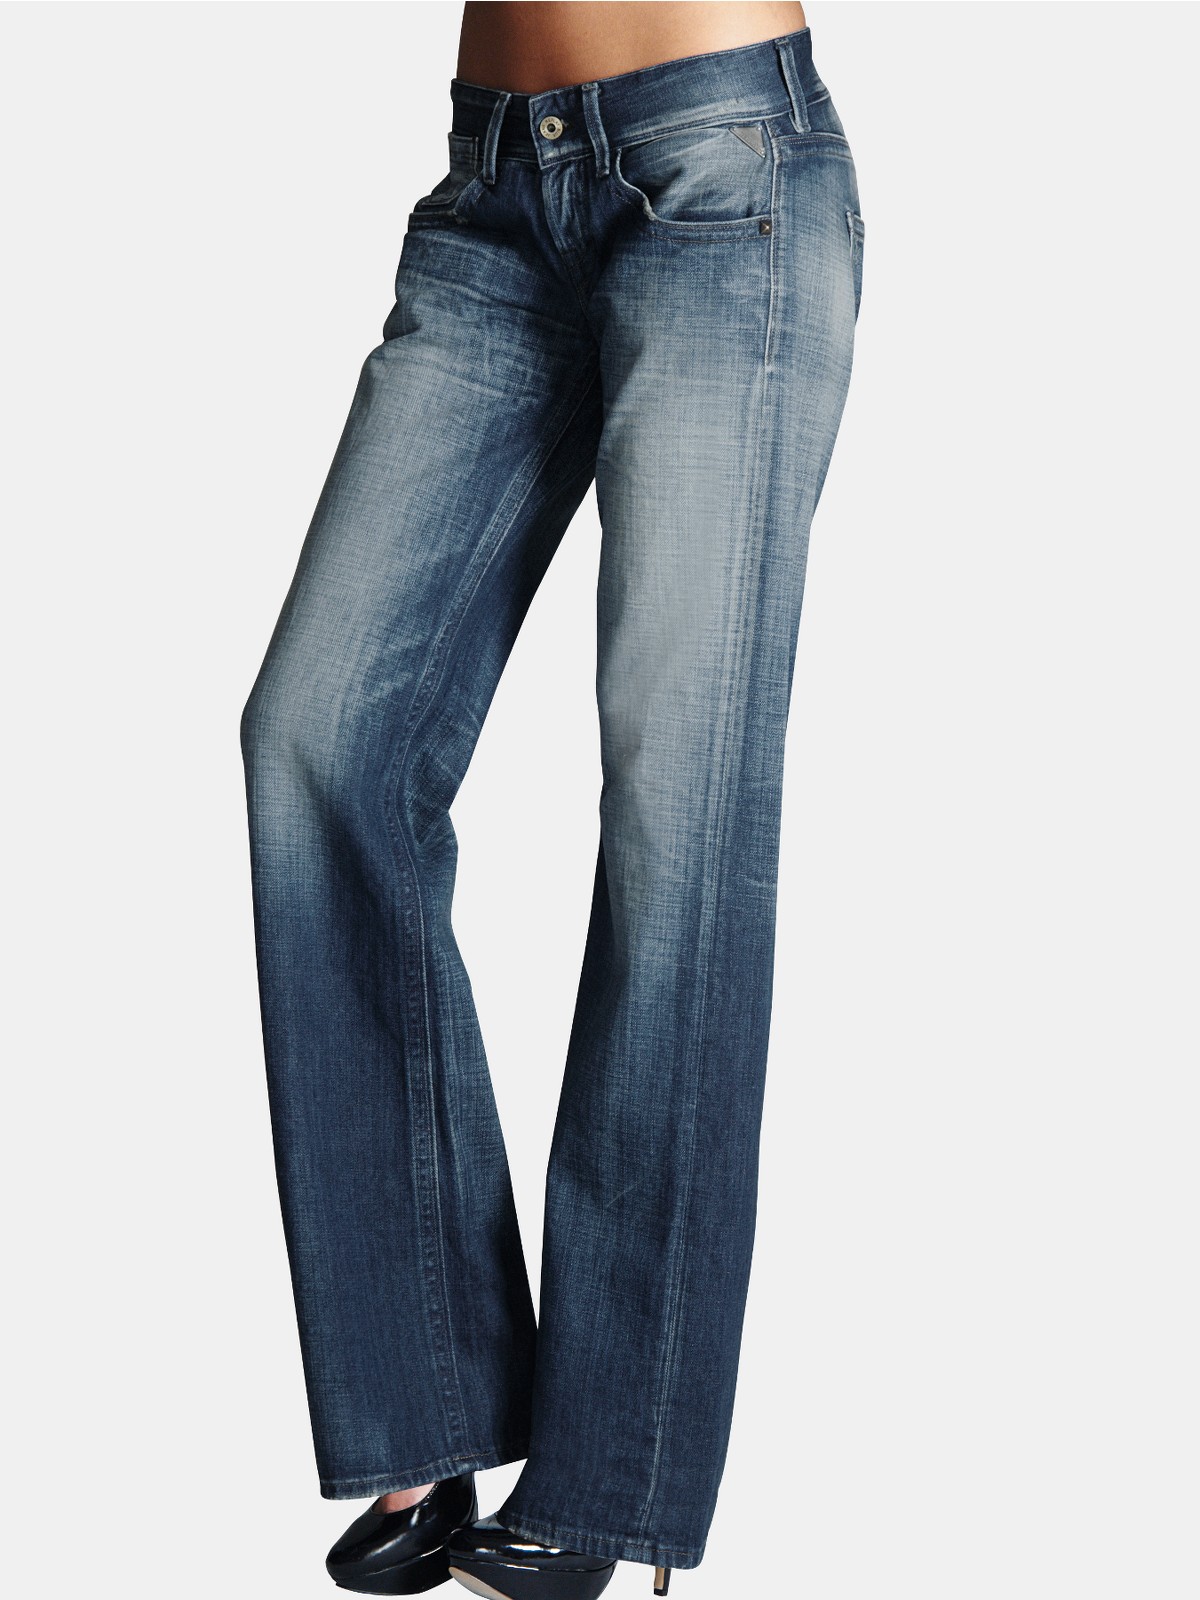 Replay Replay Janice Boyfriend Jeans in Blue (mid_wash) | Lyst